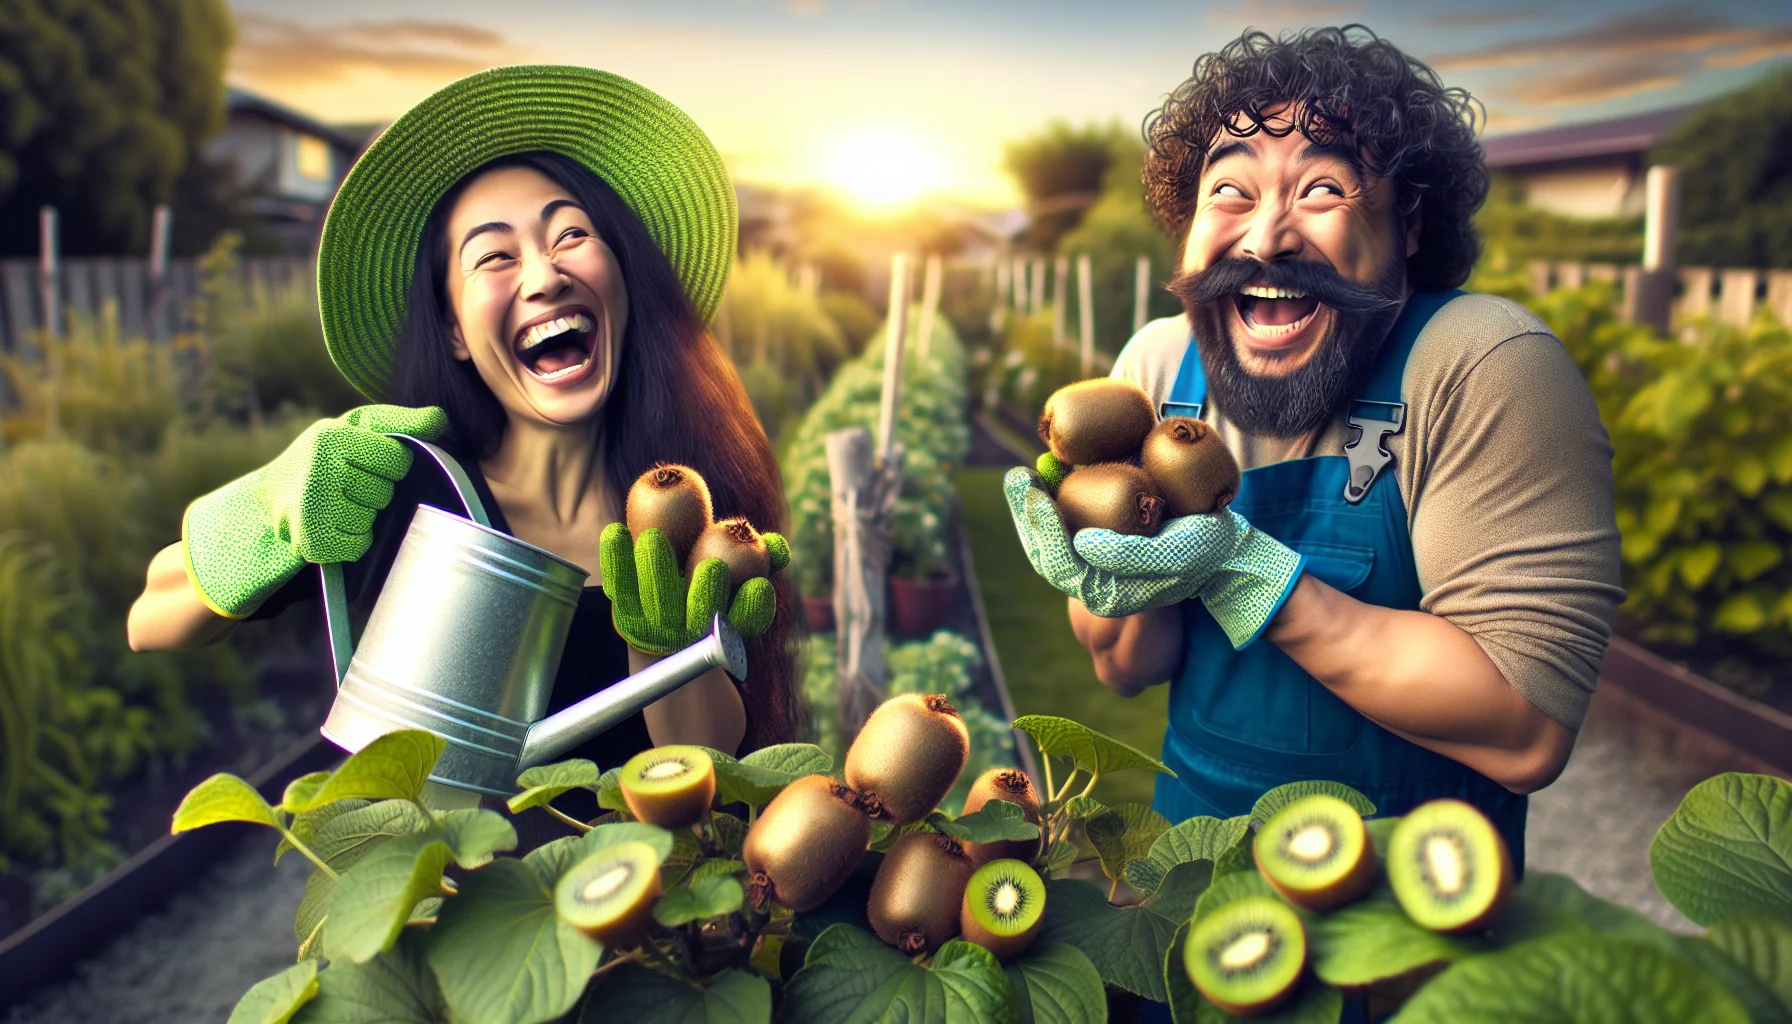 Imagine an amusing scene highlighting the joys of gardening. On the left, an adult Hispanic female, wearing a bright green gardening hat and gloves, is laughing heartily as she holds a watering can over a kiwi vine laden with ripe fruits. On the right, a jovial South-Asian male, dressed in blue overalls, is playfully juggling three kiwi fruits, with a look of excitement. The vine is growing in a beautiful garden bed, lush and full of various plants. In the background, the sun is setting, casting a warm golden light on this heartwarming scene.